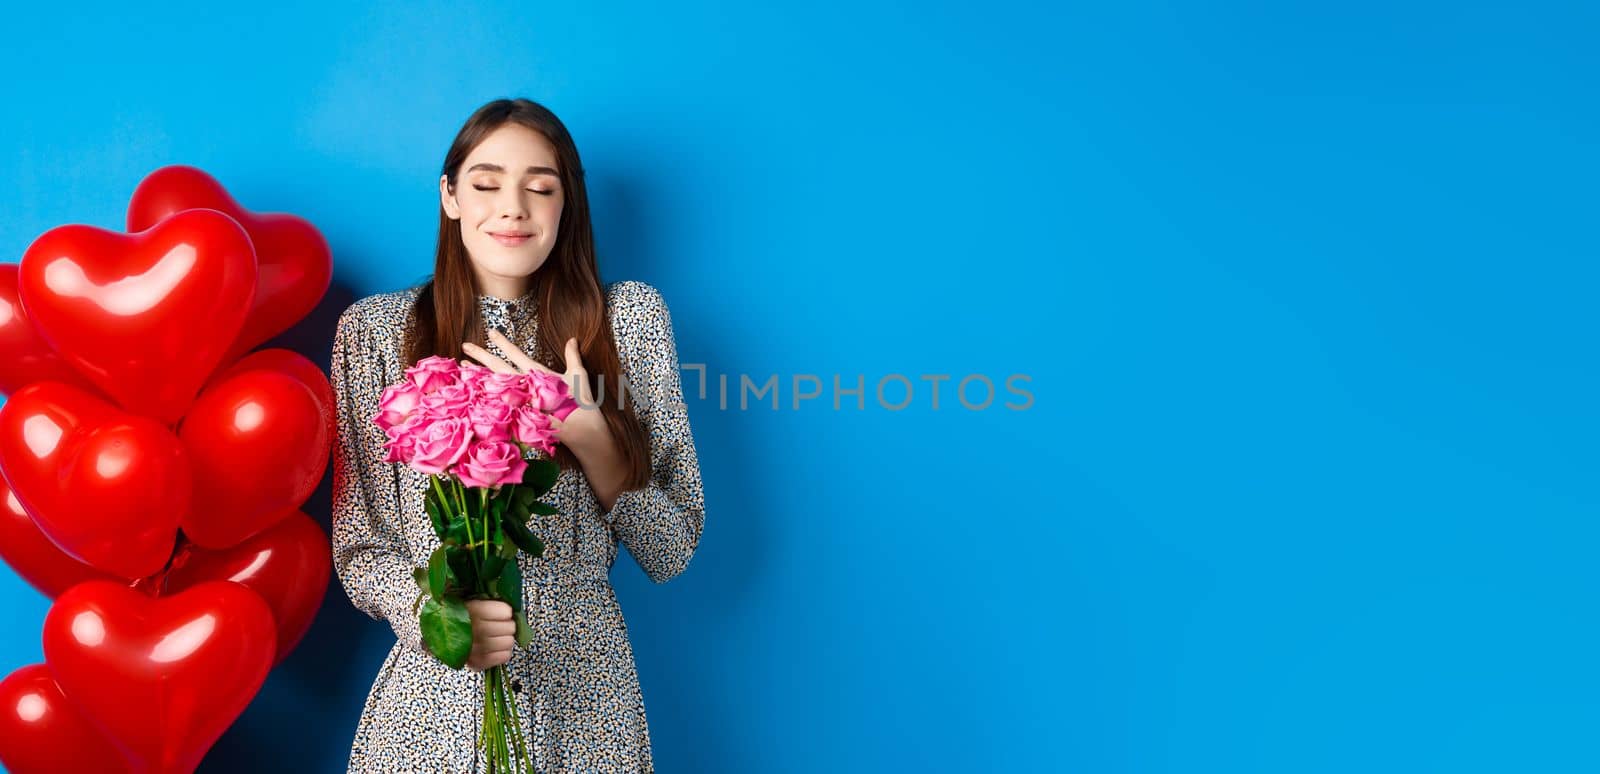 Valentines day. Romantic lovely woman in dress, close eyes and smiling, receiving flowers from lover, smelling bouquet of pink roses, blue background.